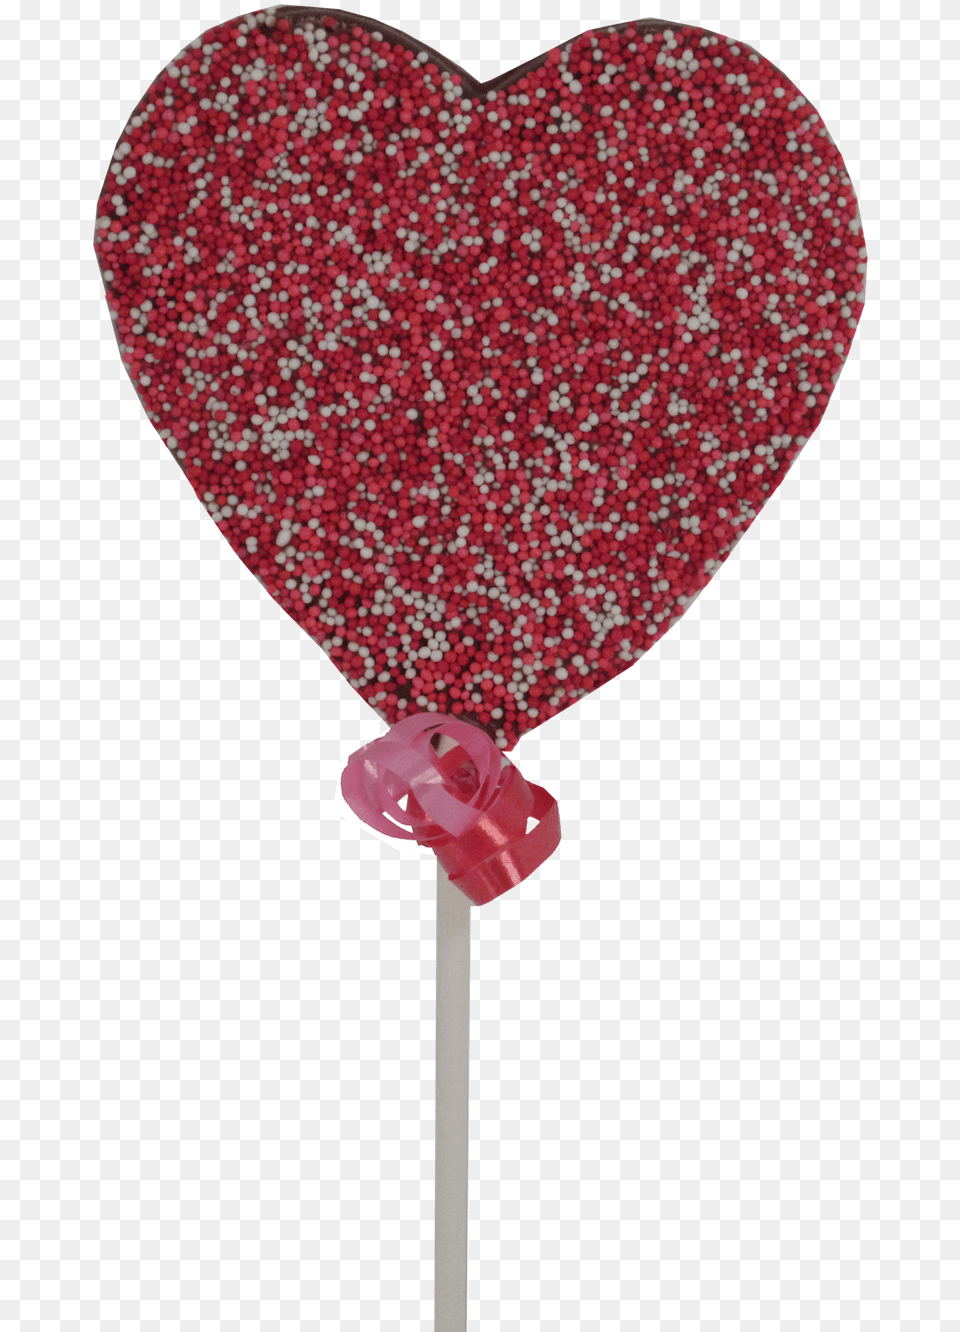 Heart, Candy, Food, Sweets, Lollipop Free Png Download